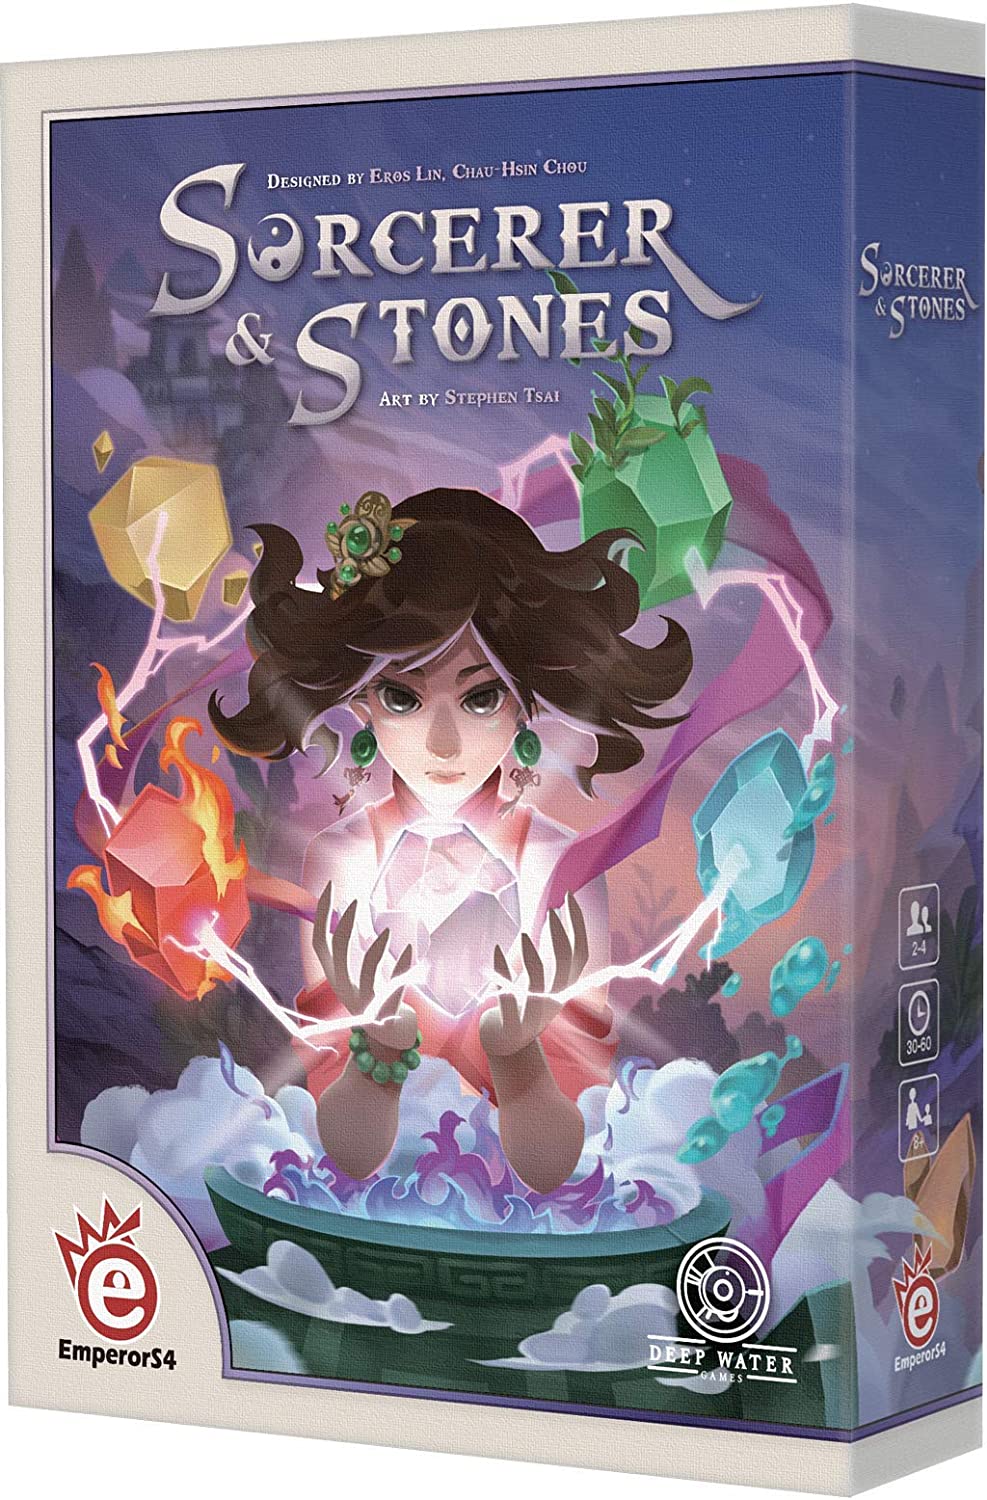 (BSG Certified USED) Sorcerer and Stones